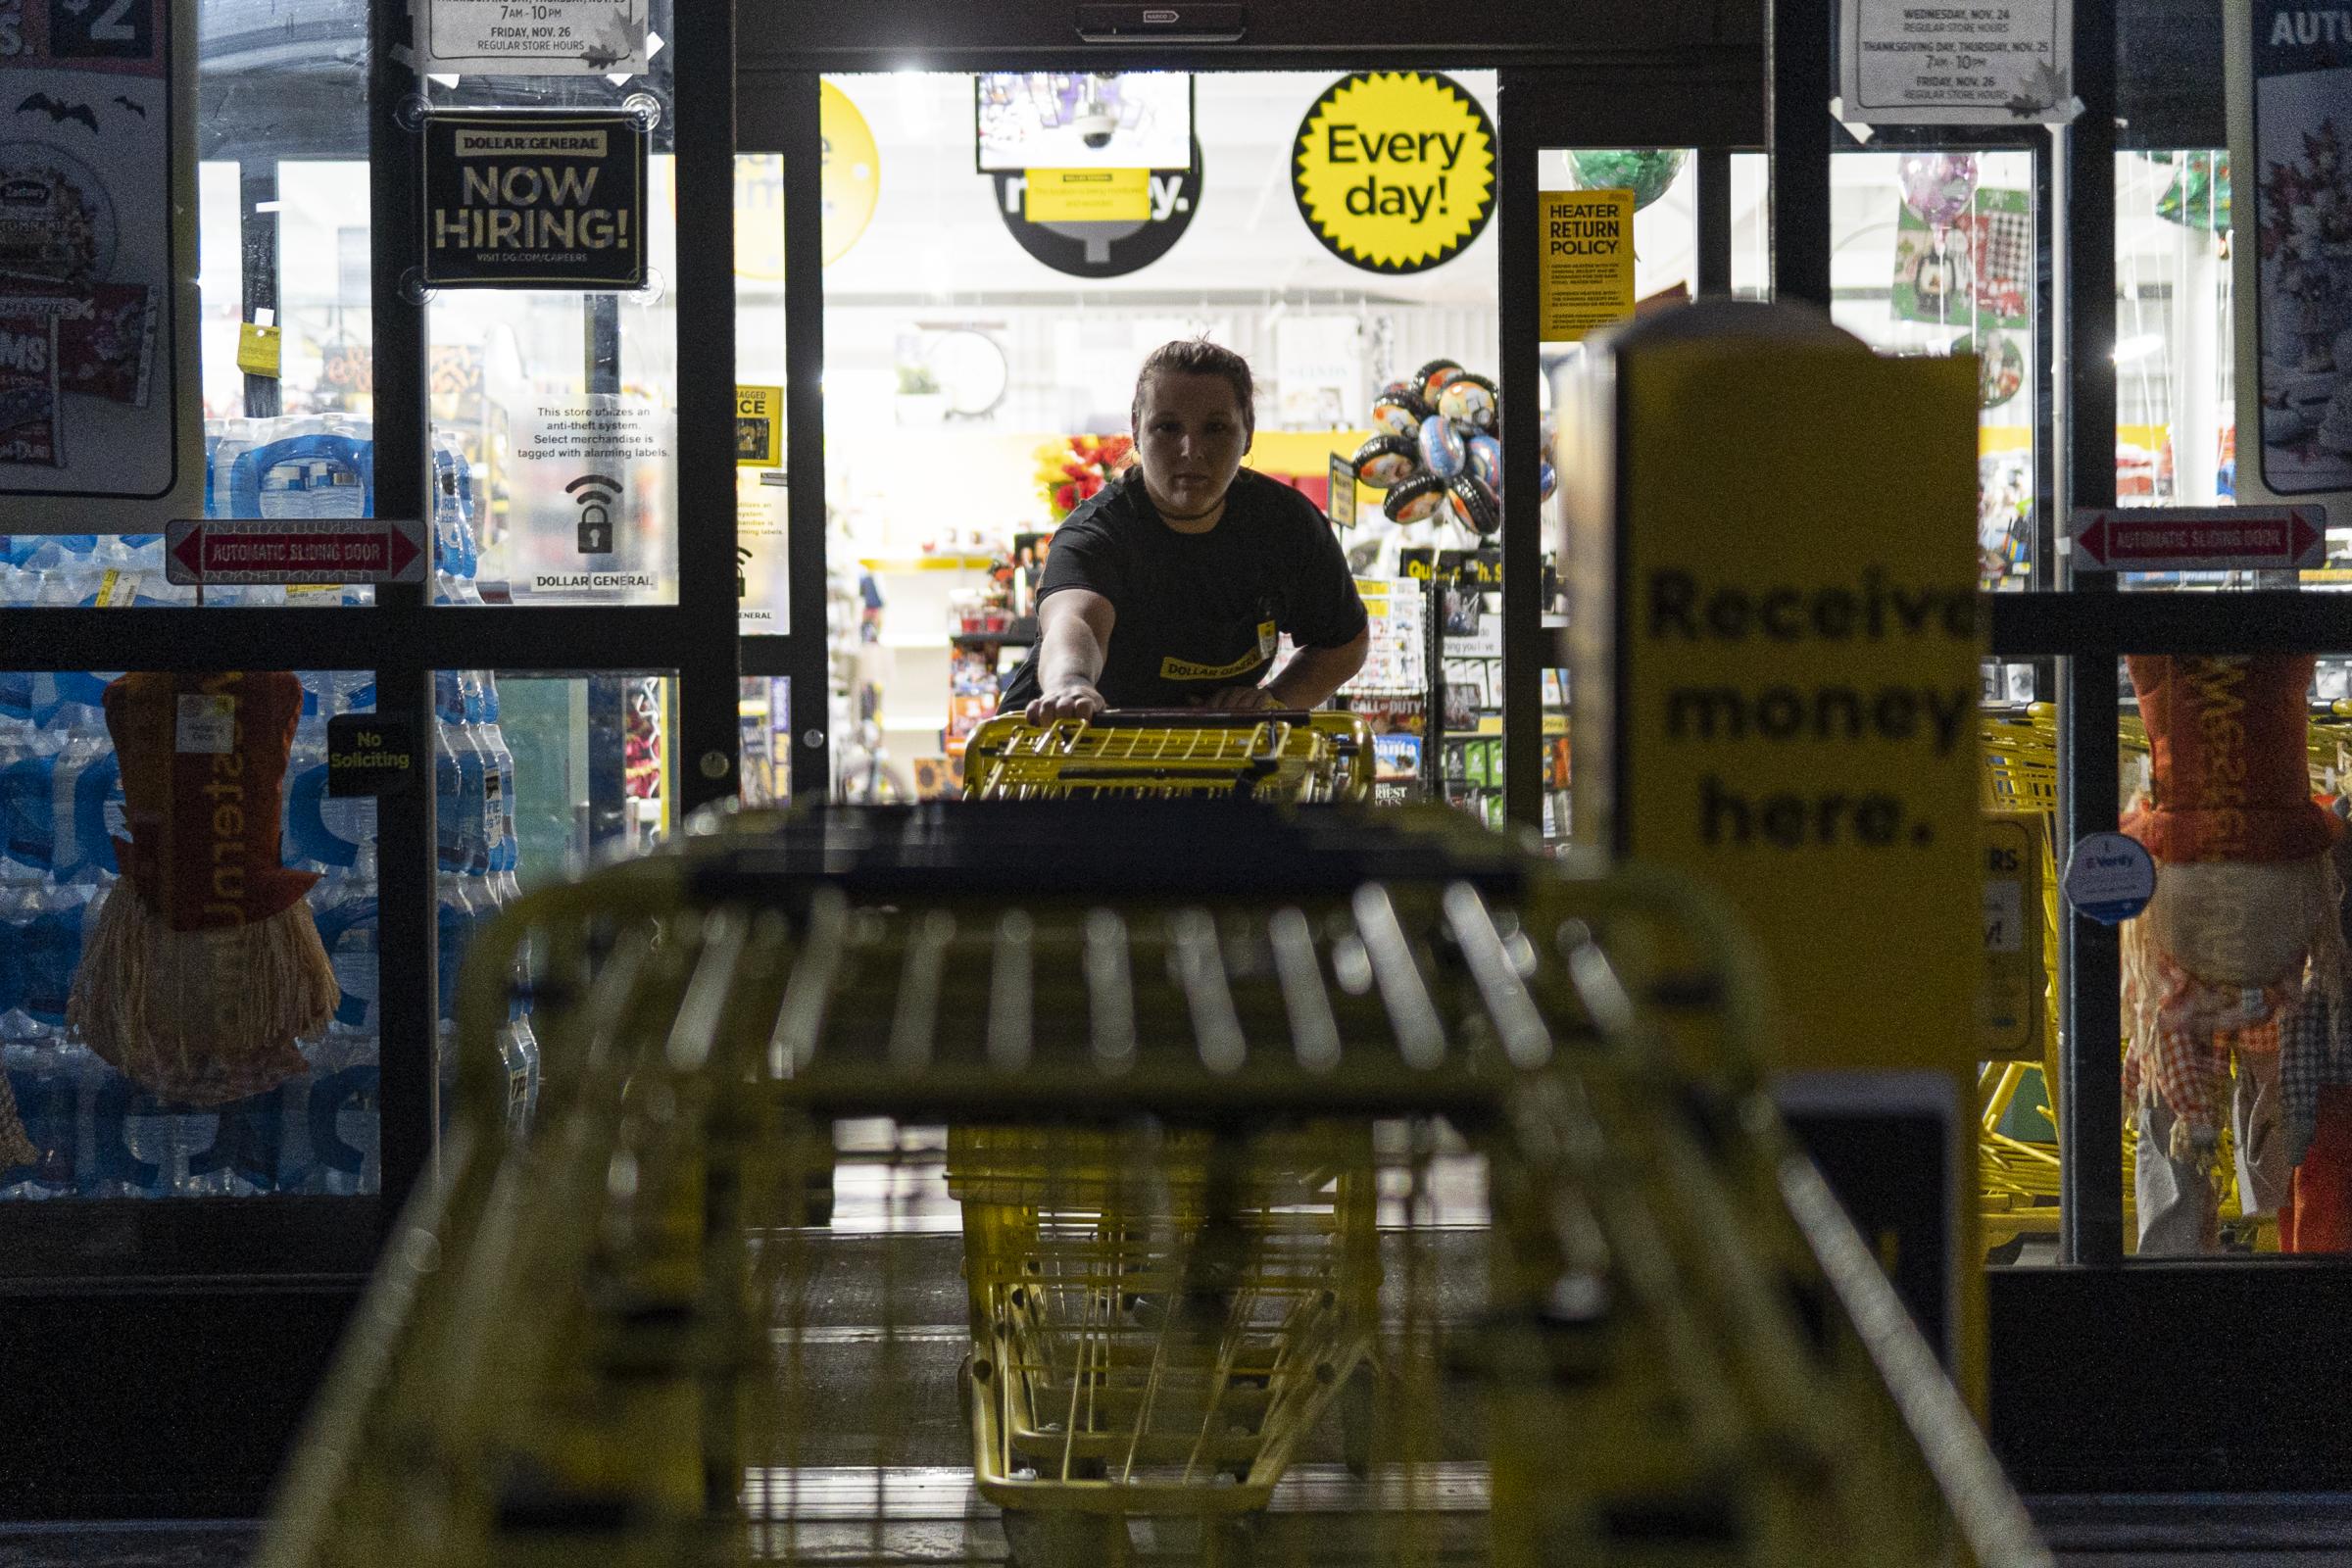 The worker revolt comes to a Dollar General in Connecticut